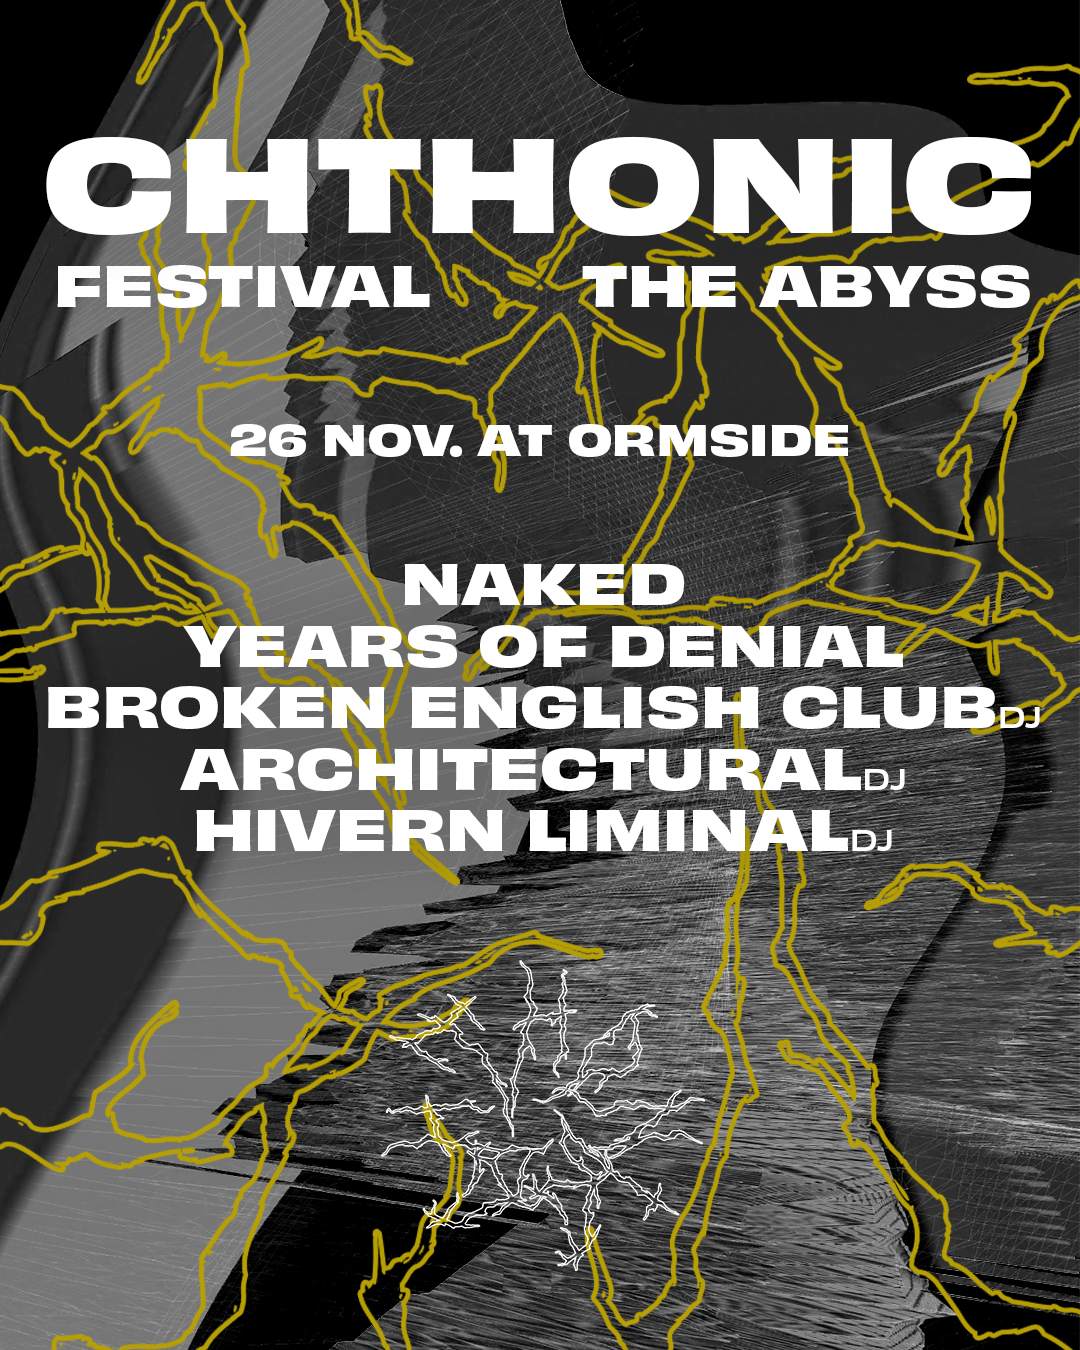 CHTHONIC Festival Afterparty — The Abyss at Ormside Projects, London